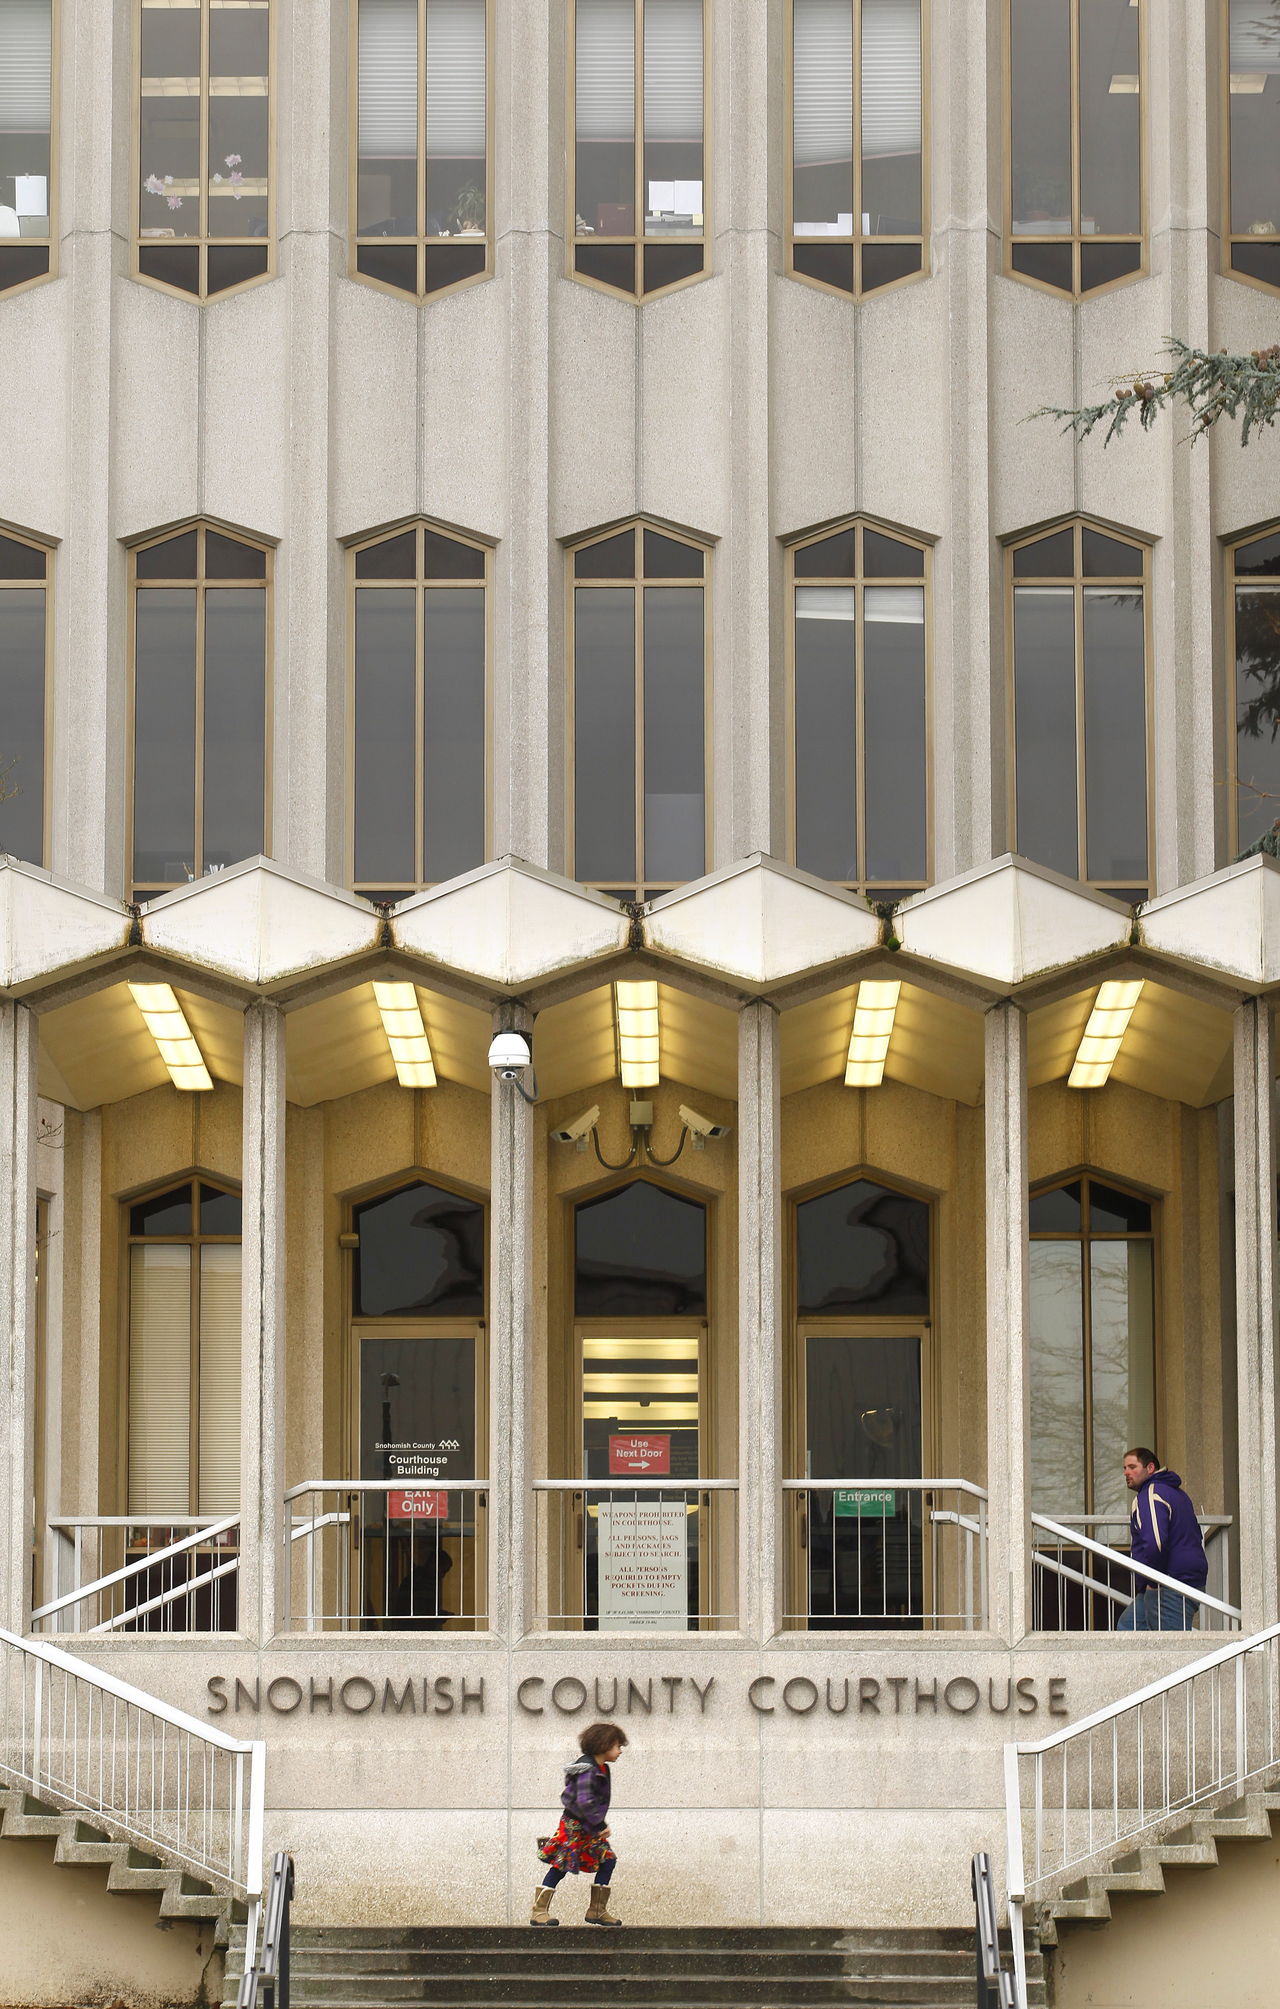 The front facade of the Snohomish County Courthouse building in Everett, photographed Dec. 2015.